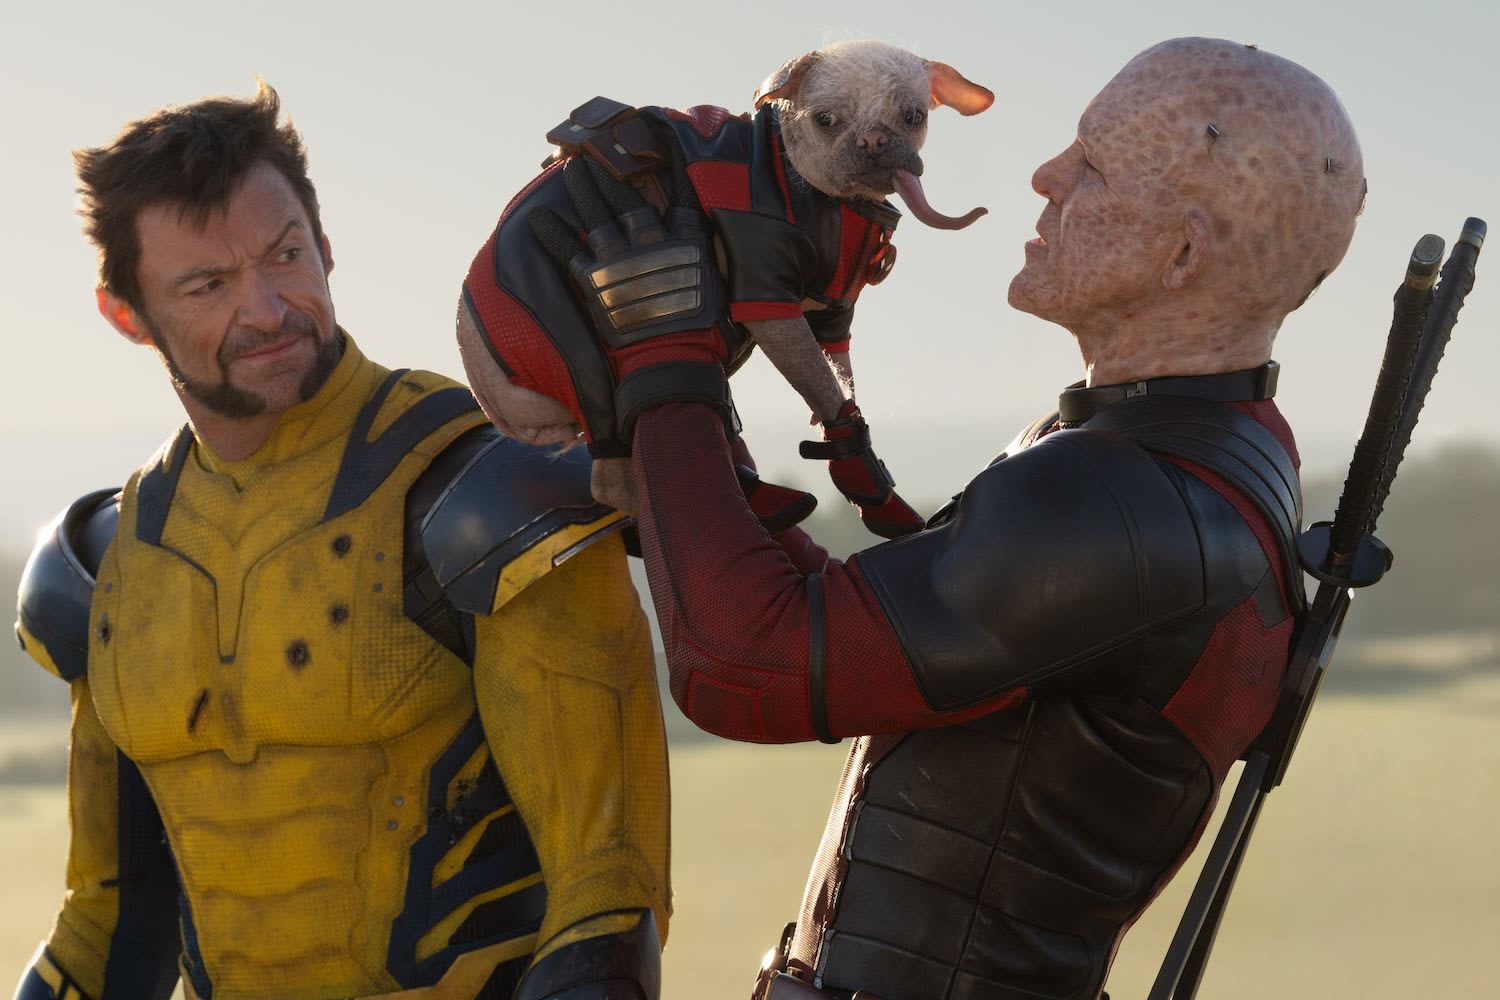 ‘Deadpool & Wolverine’ Scores Mightier-Than-Expected $211 Million, Sixth-Biggest Debut in Box Office History